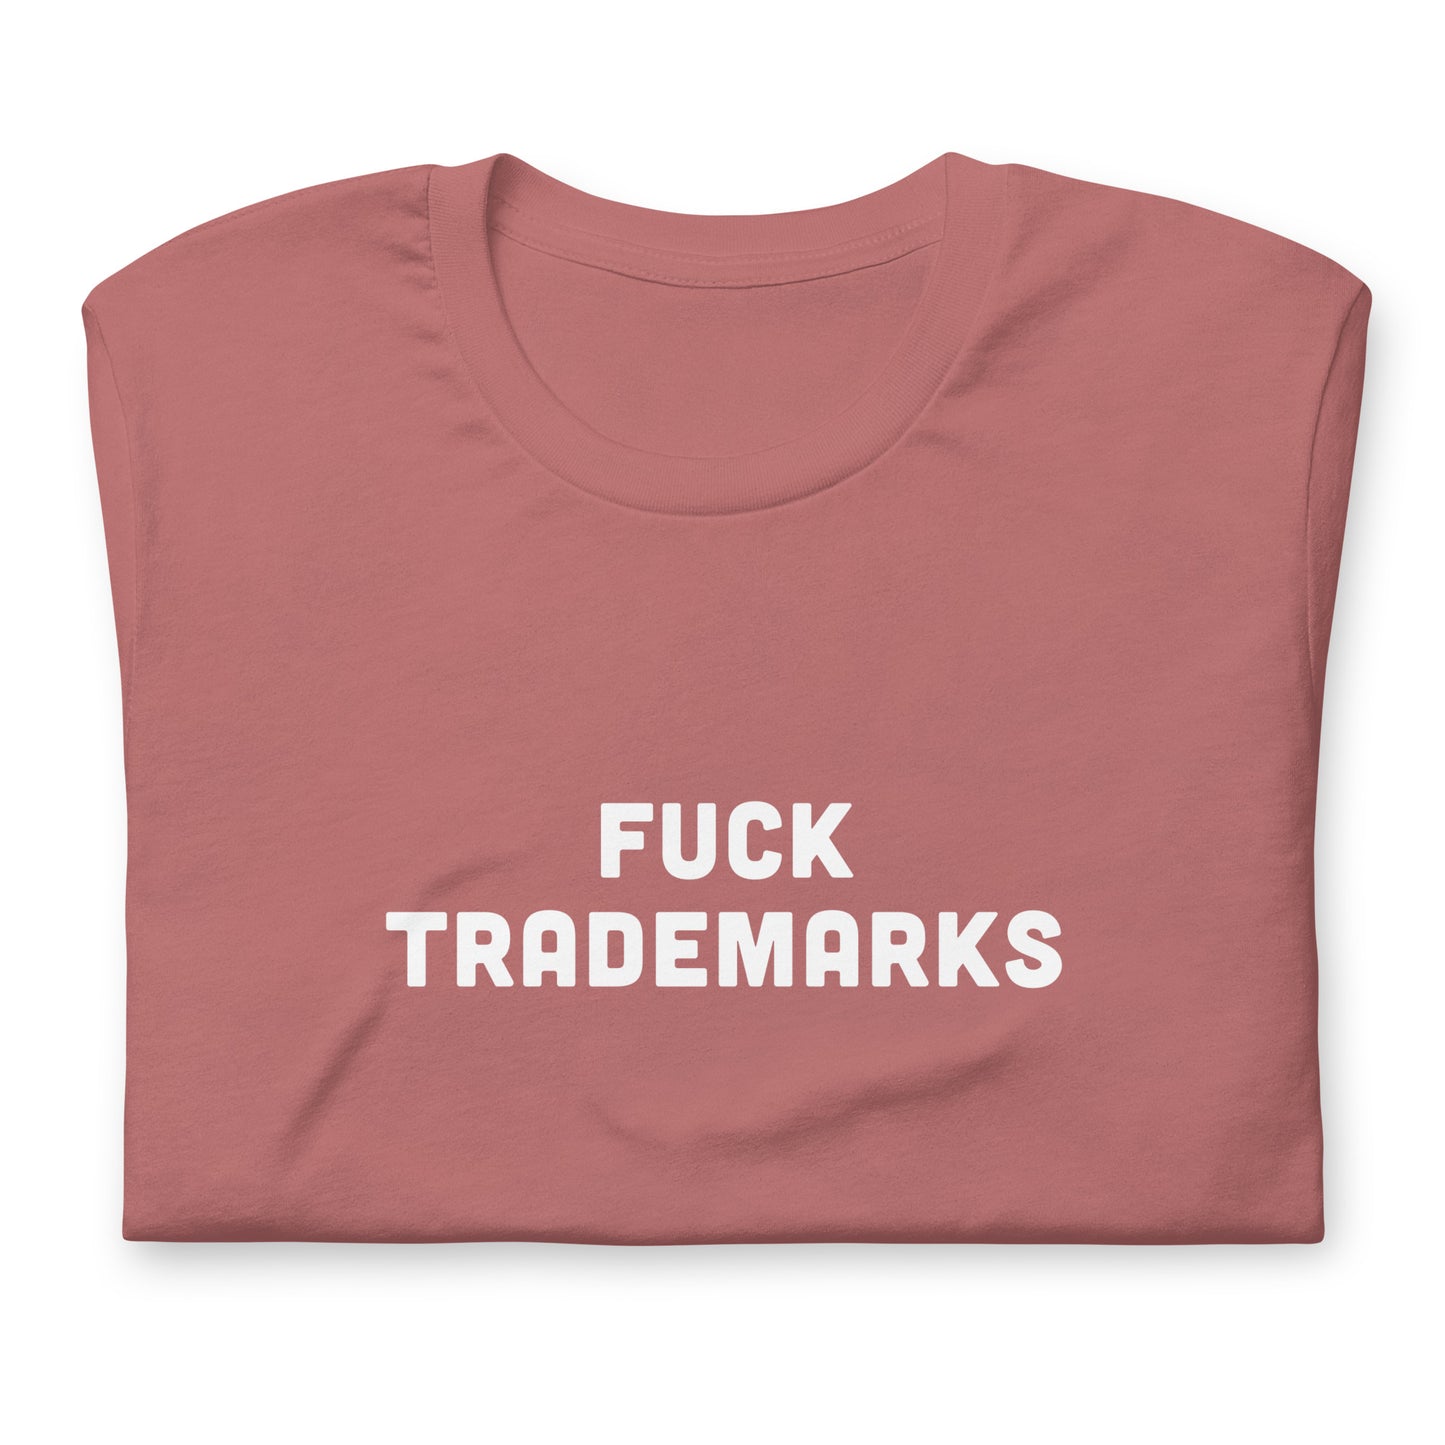 Fuck Trademarks T-Shirt Size XL Color Navy